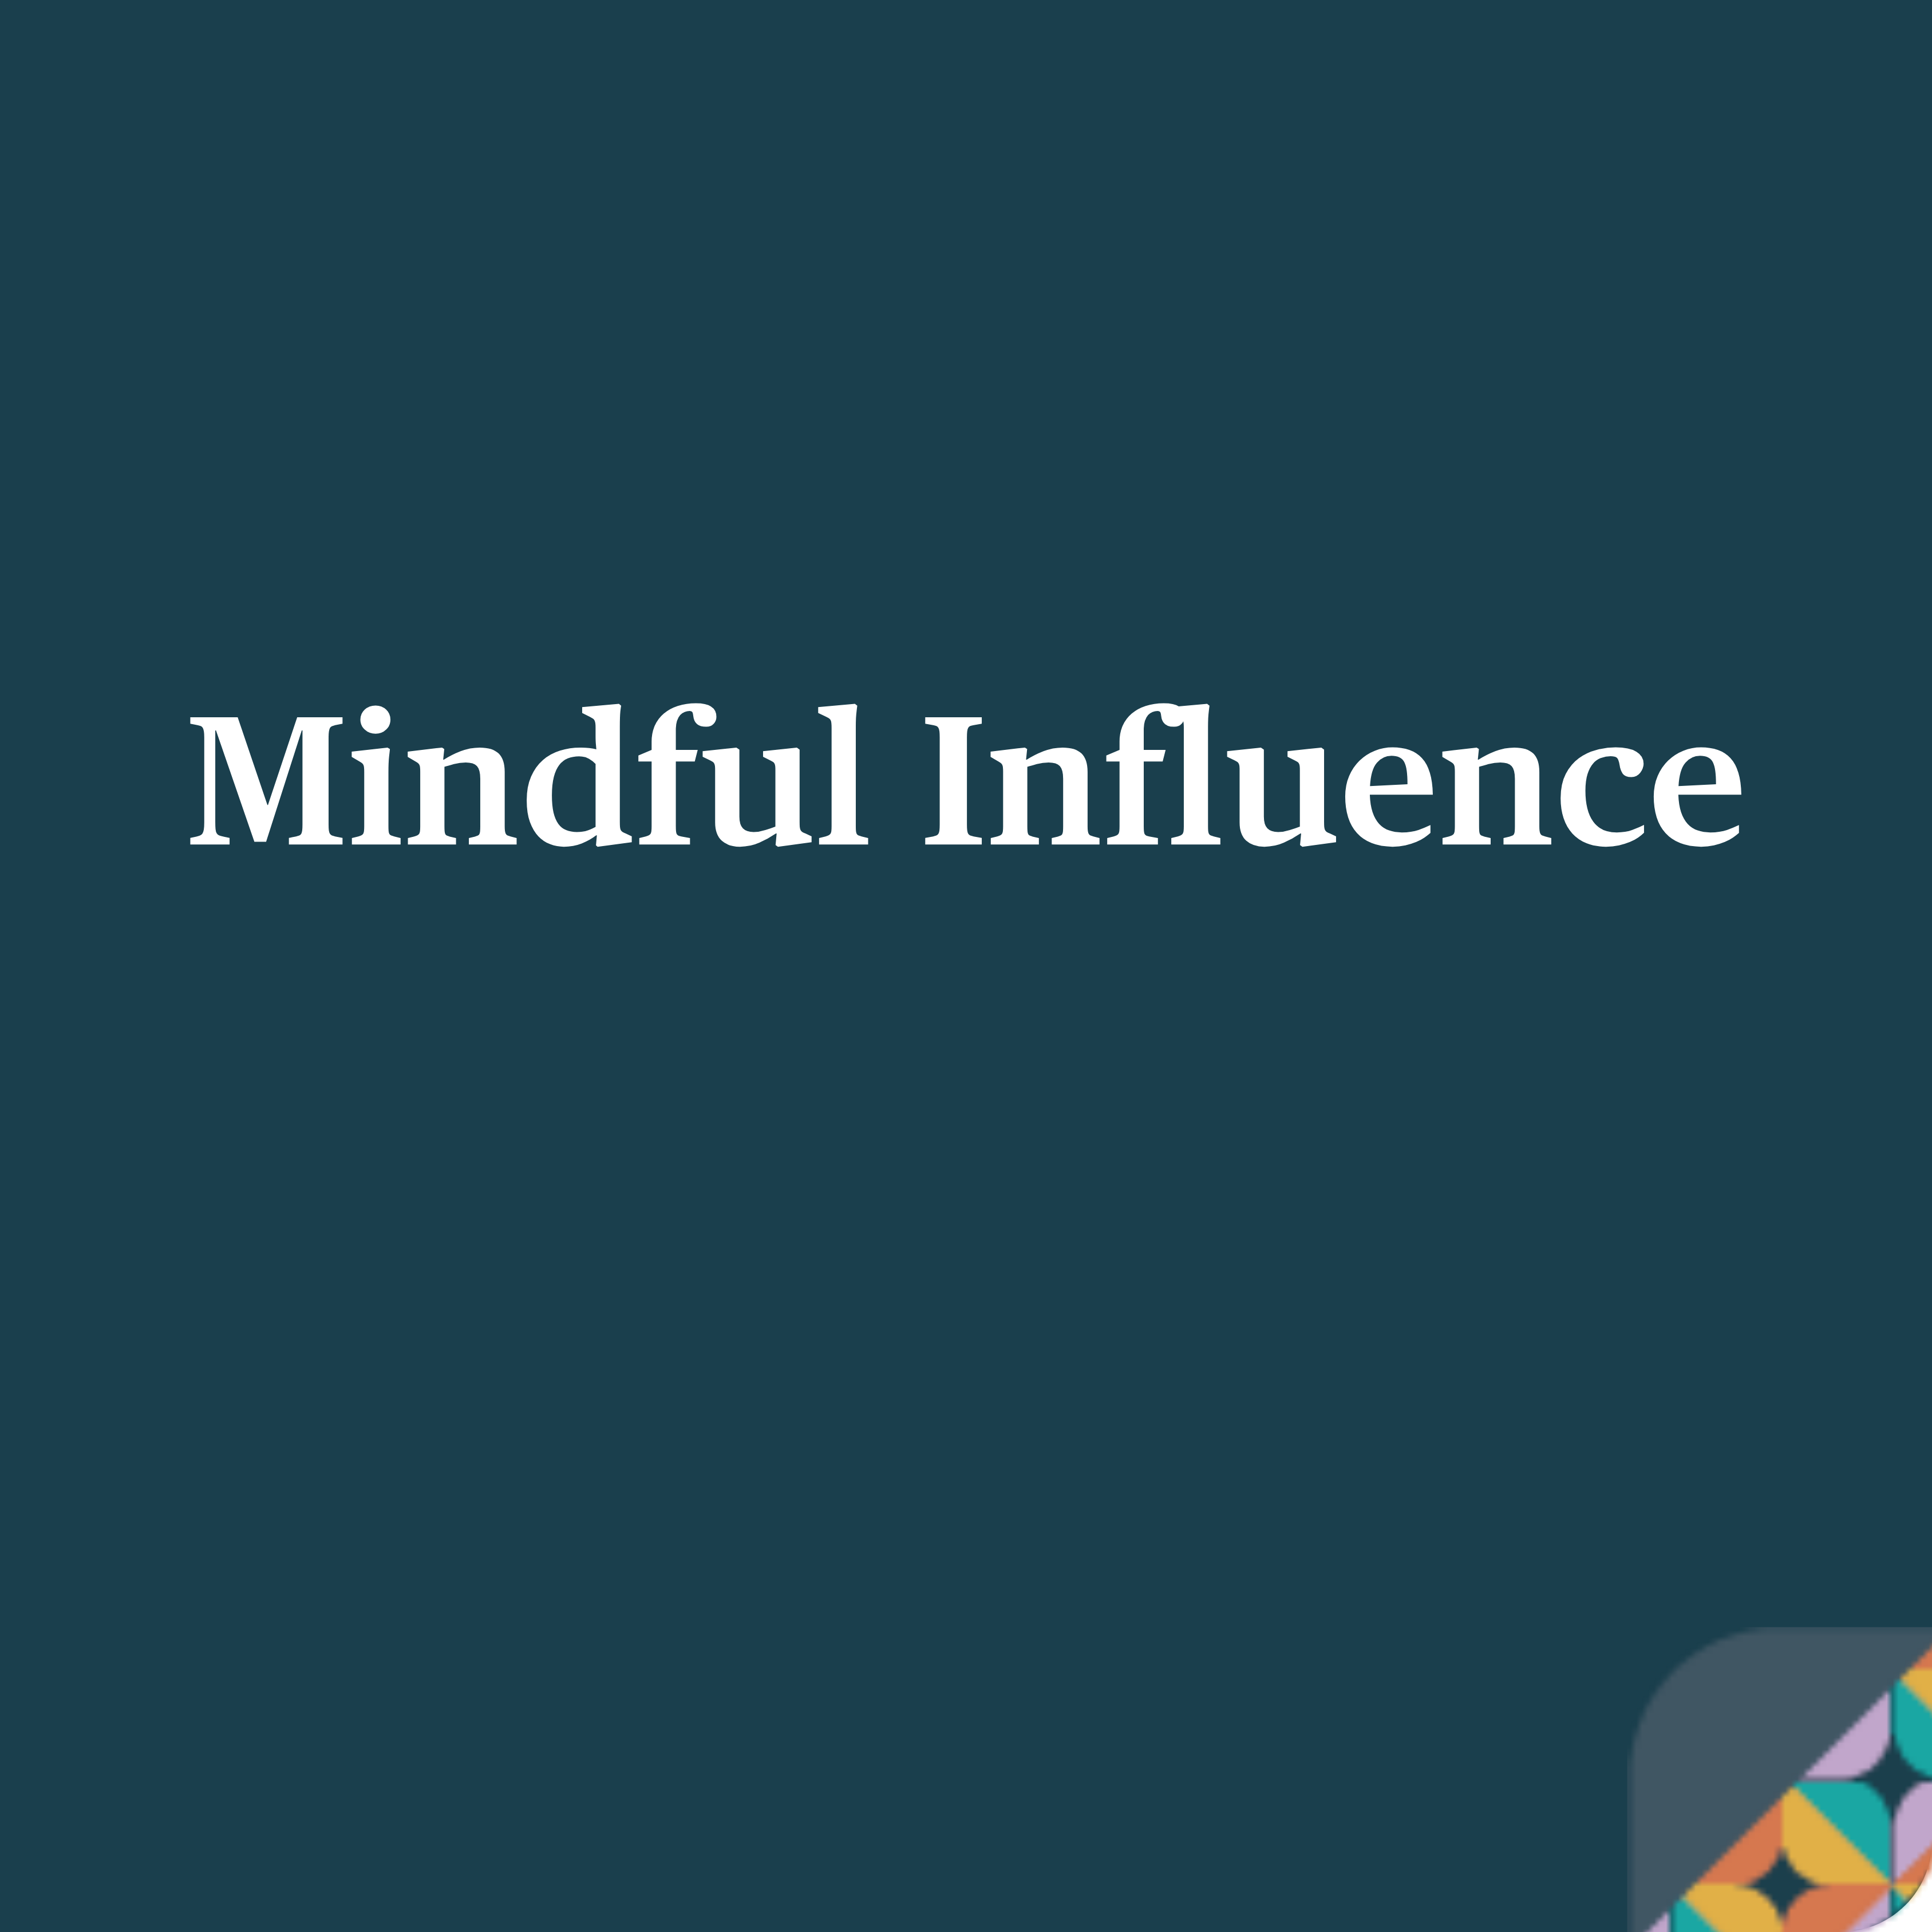 A blue tile with cream writing saying Mindful Influence